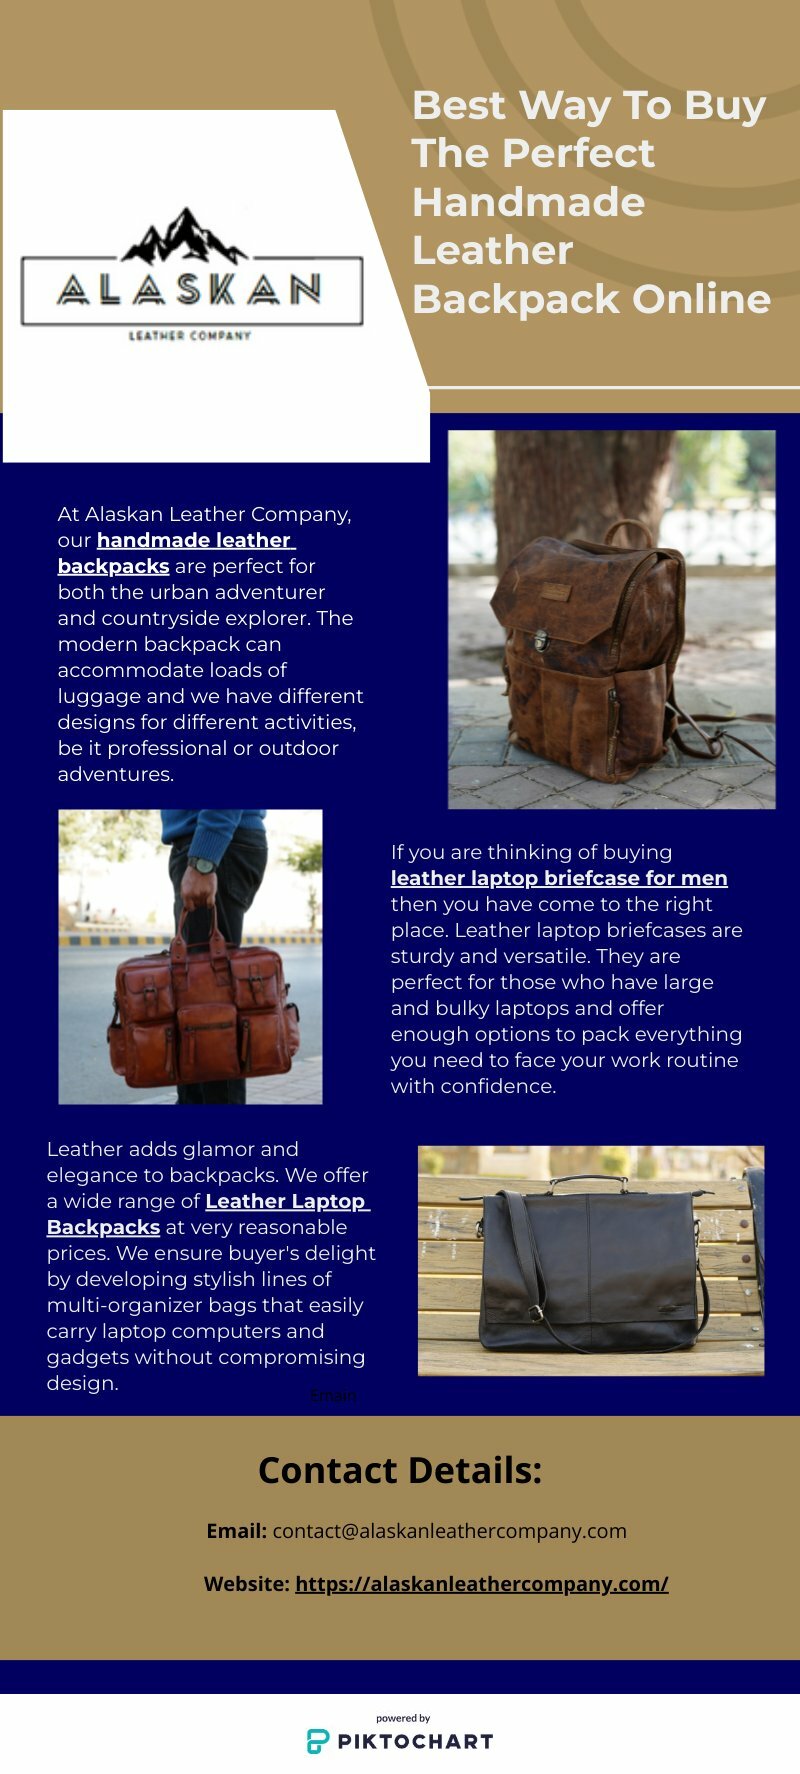 Best Way To Buy The Perfect Handmade Leather Backpack Online | Piktochart Visual Editor